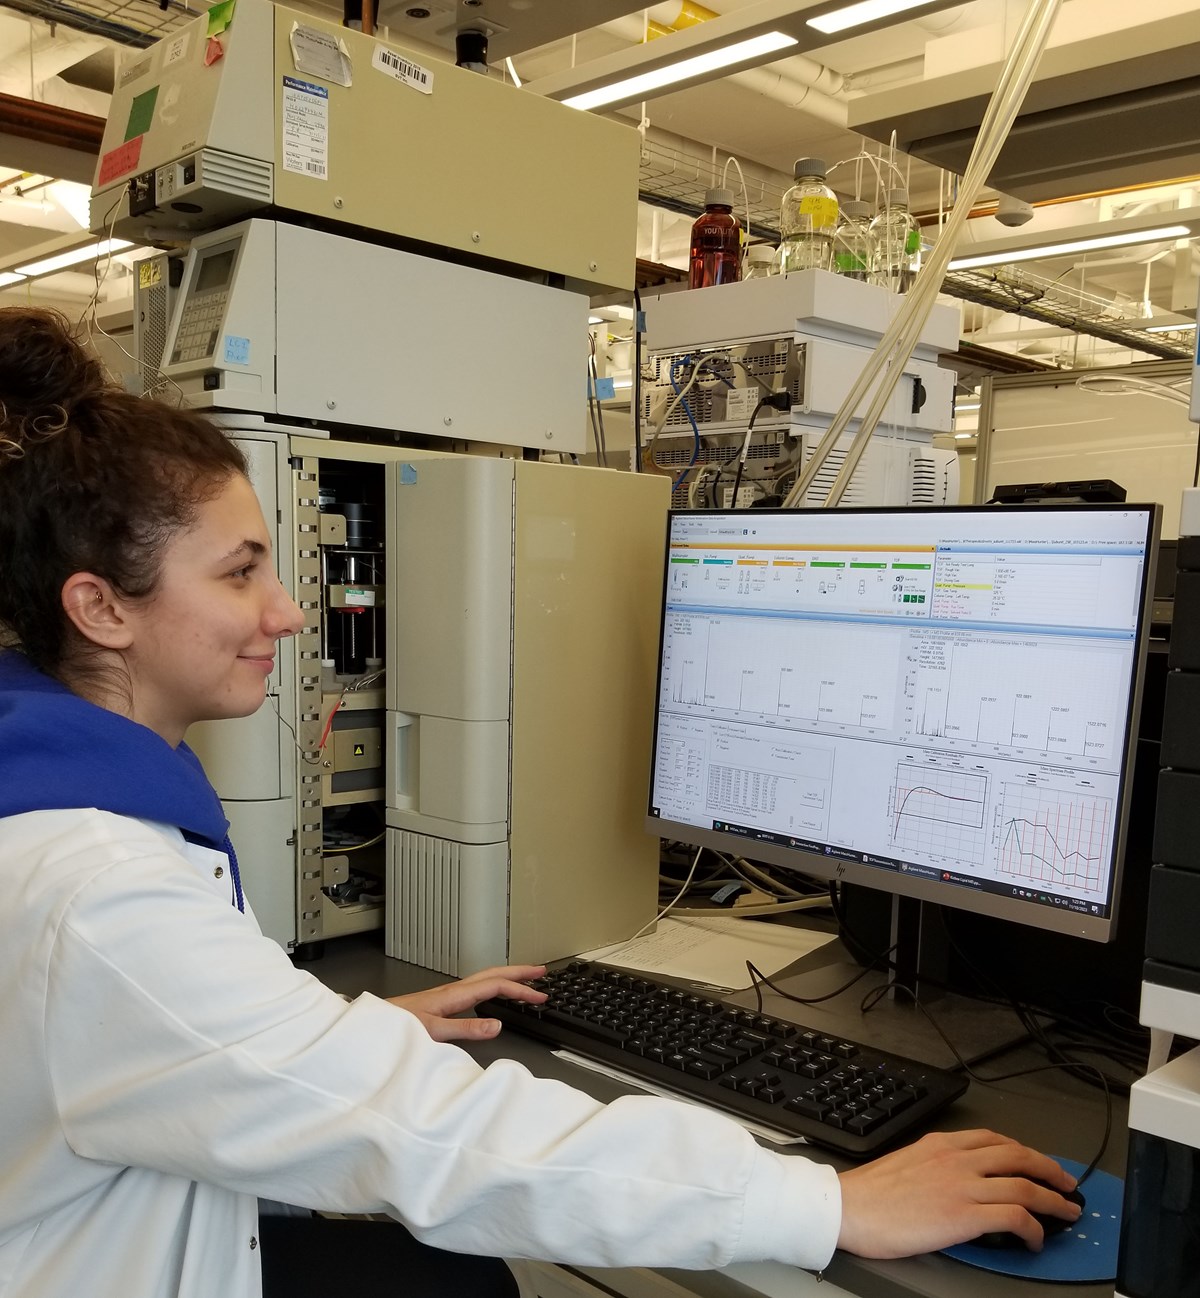 Student Dugah Topal working in the lab